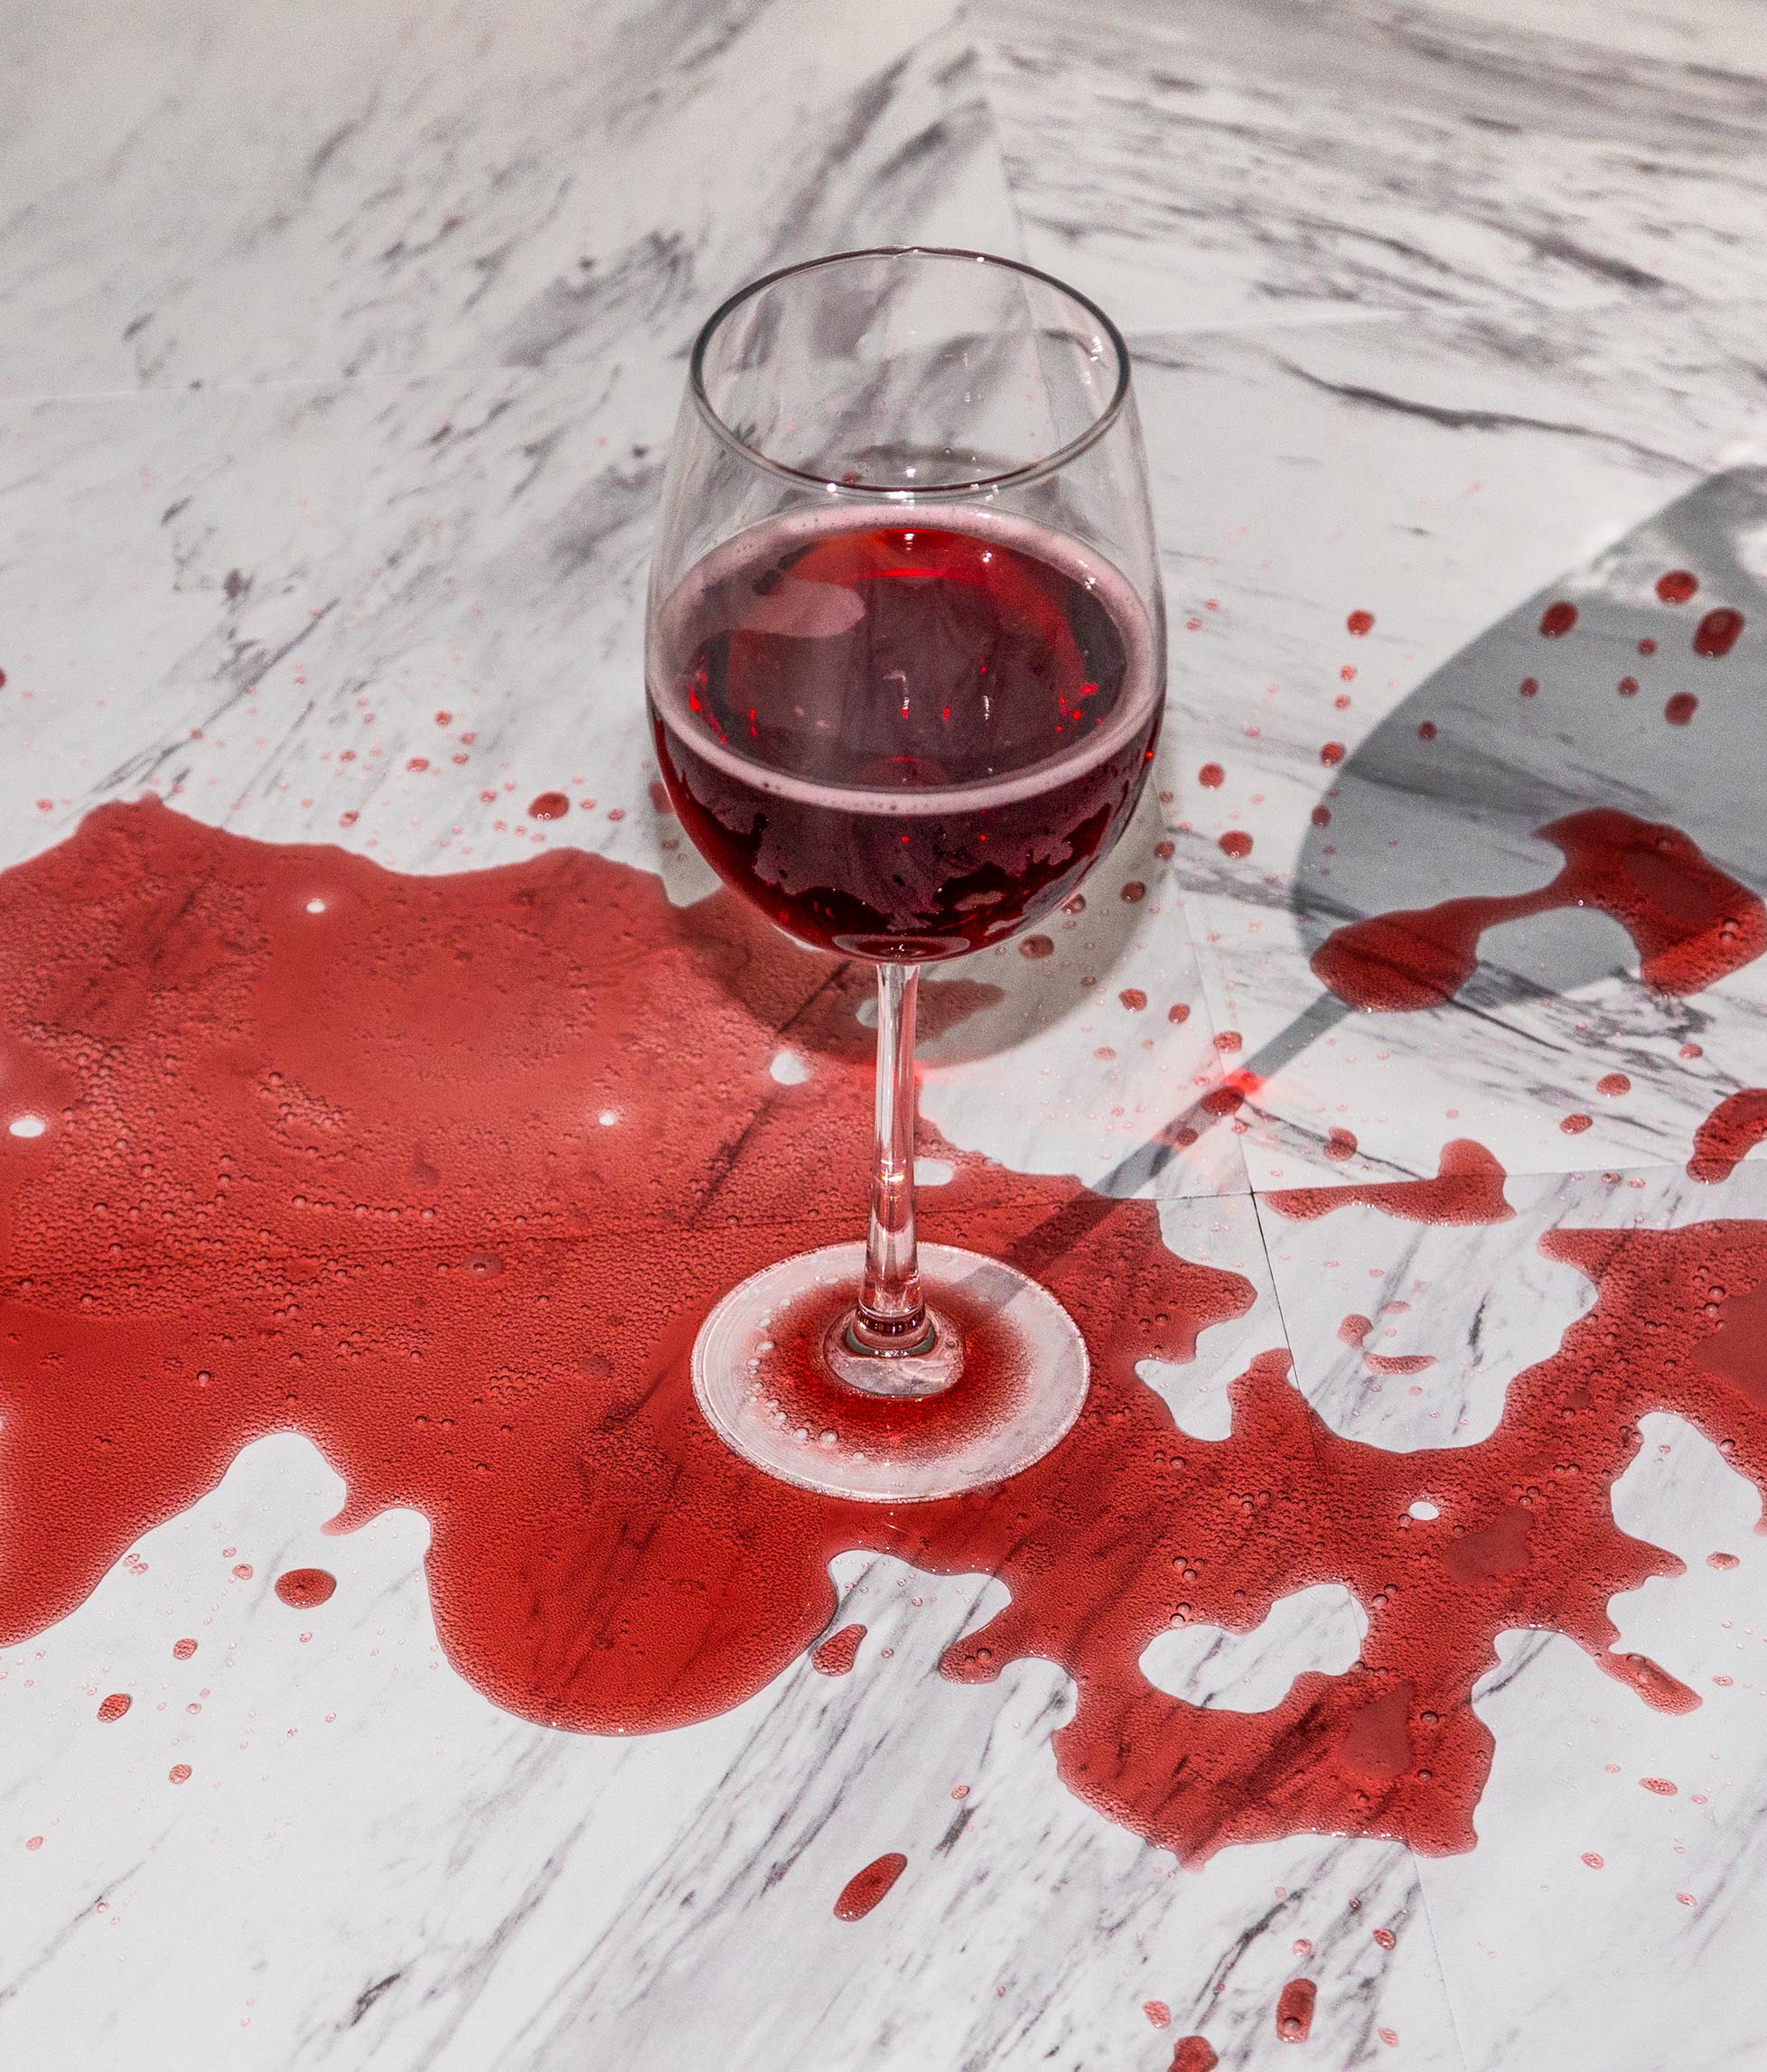 Red wine spilled over glass.